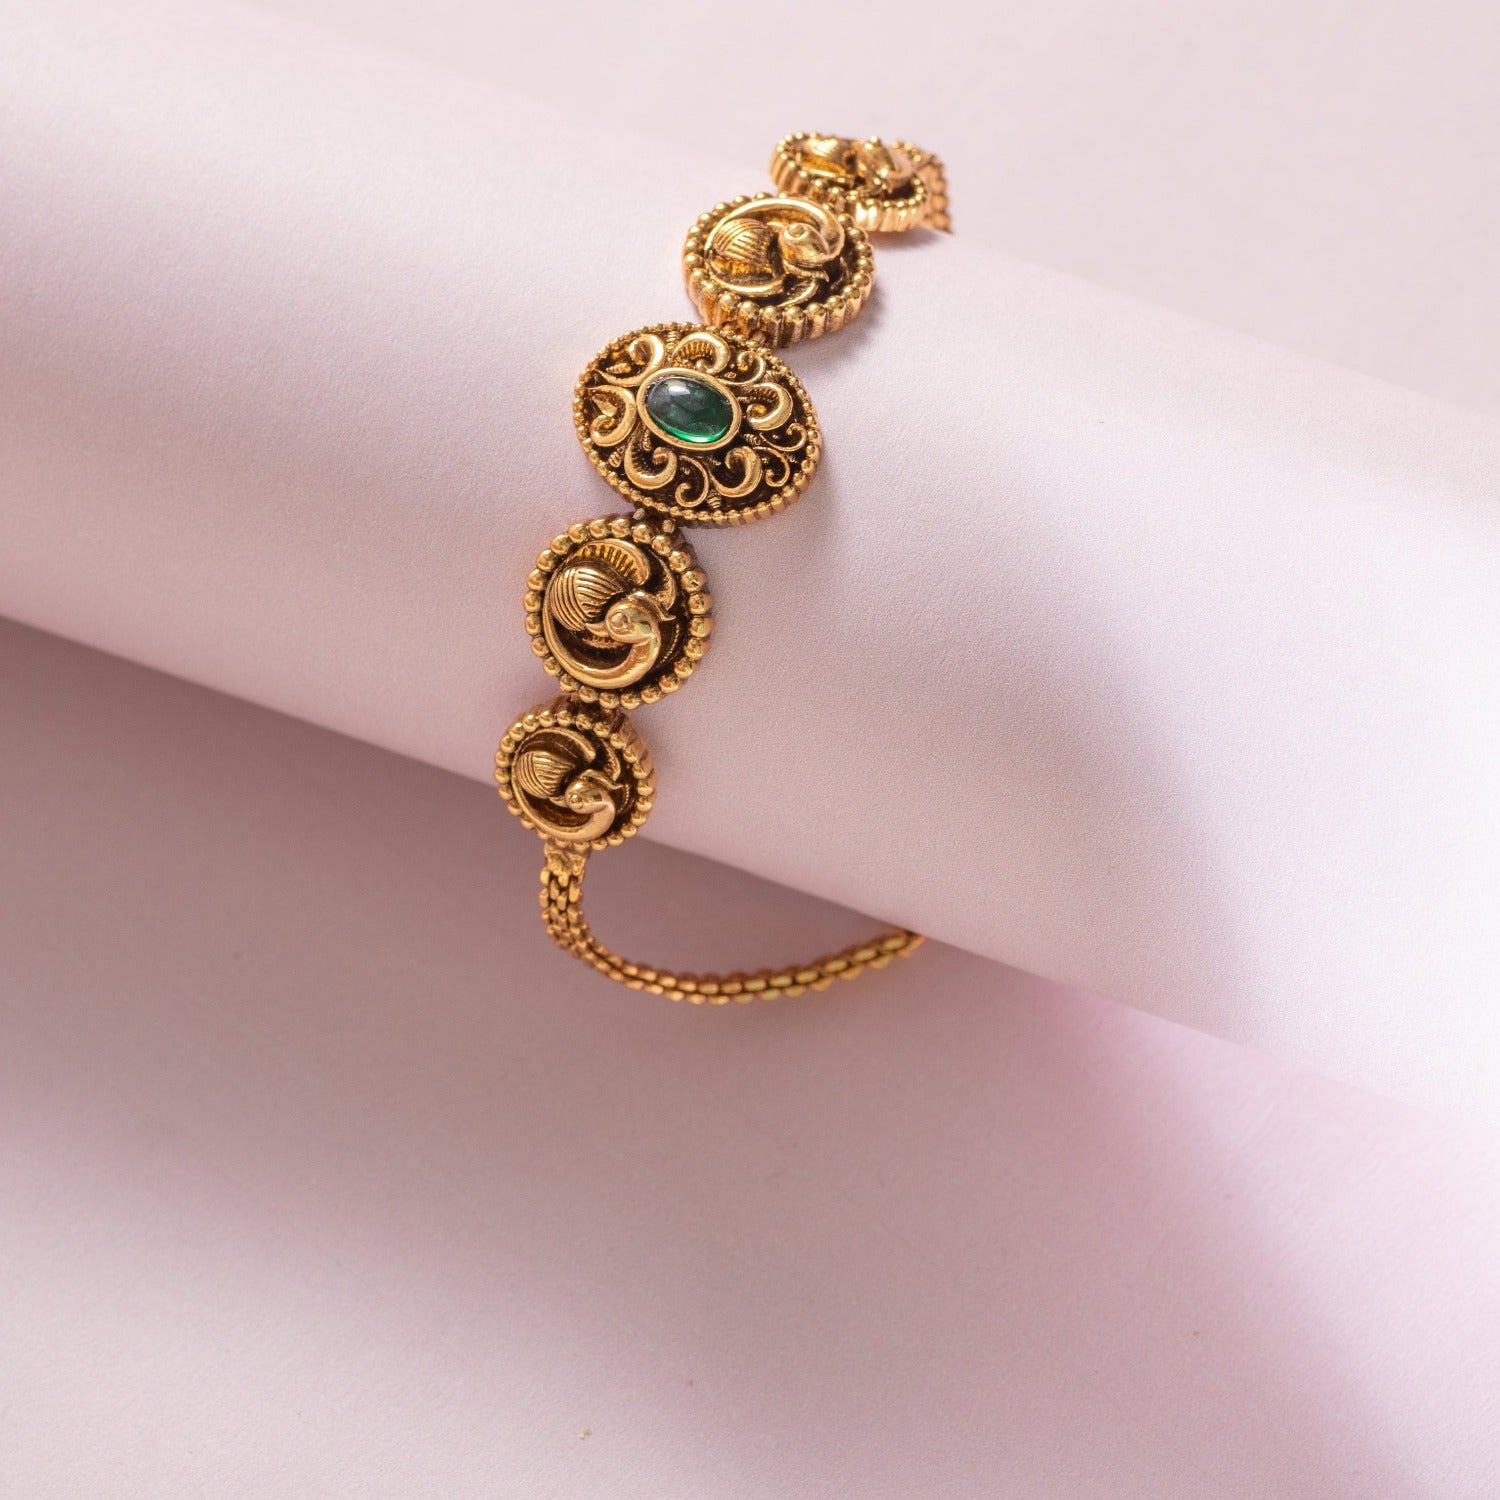 Buy TARINIKA Antique Gold Plated Kajol Bracelet with Floral Design - Indian  Bracelets for Women Perfect for Ethnic occasions | Traditional Bracelets  For Women | 1 Year Warranty* at Amazon.in